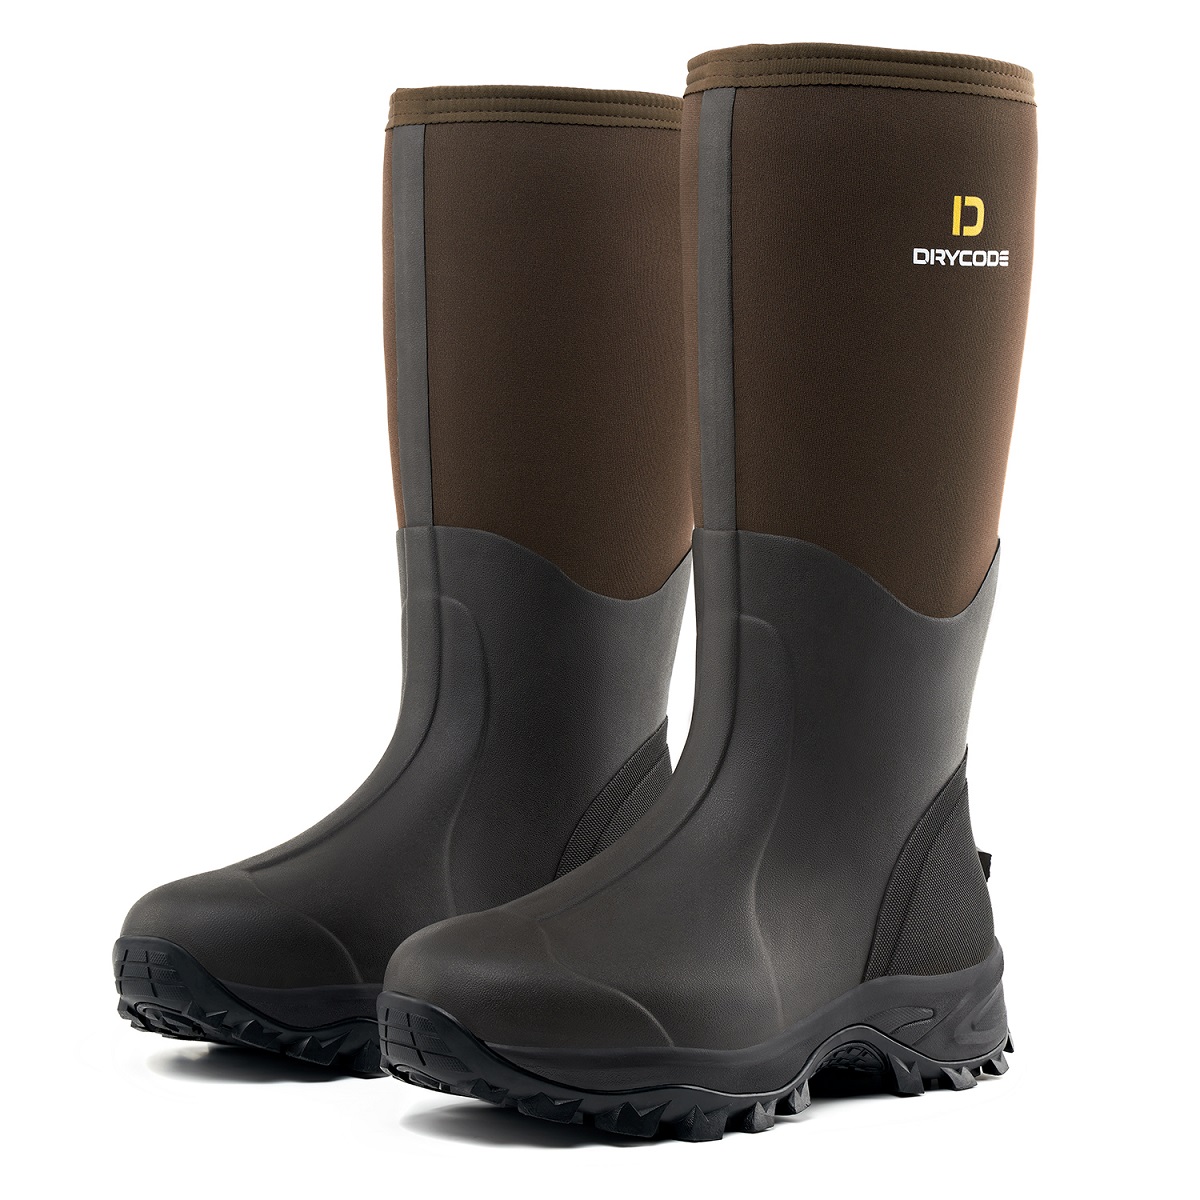 DRYCODE Rubber Boots for Men and Women, 6mm Warm Neoprene